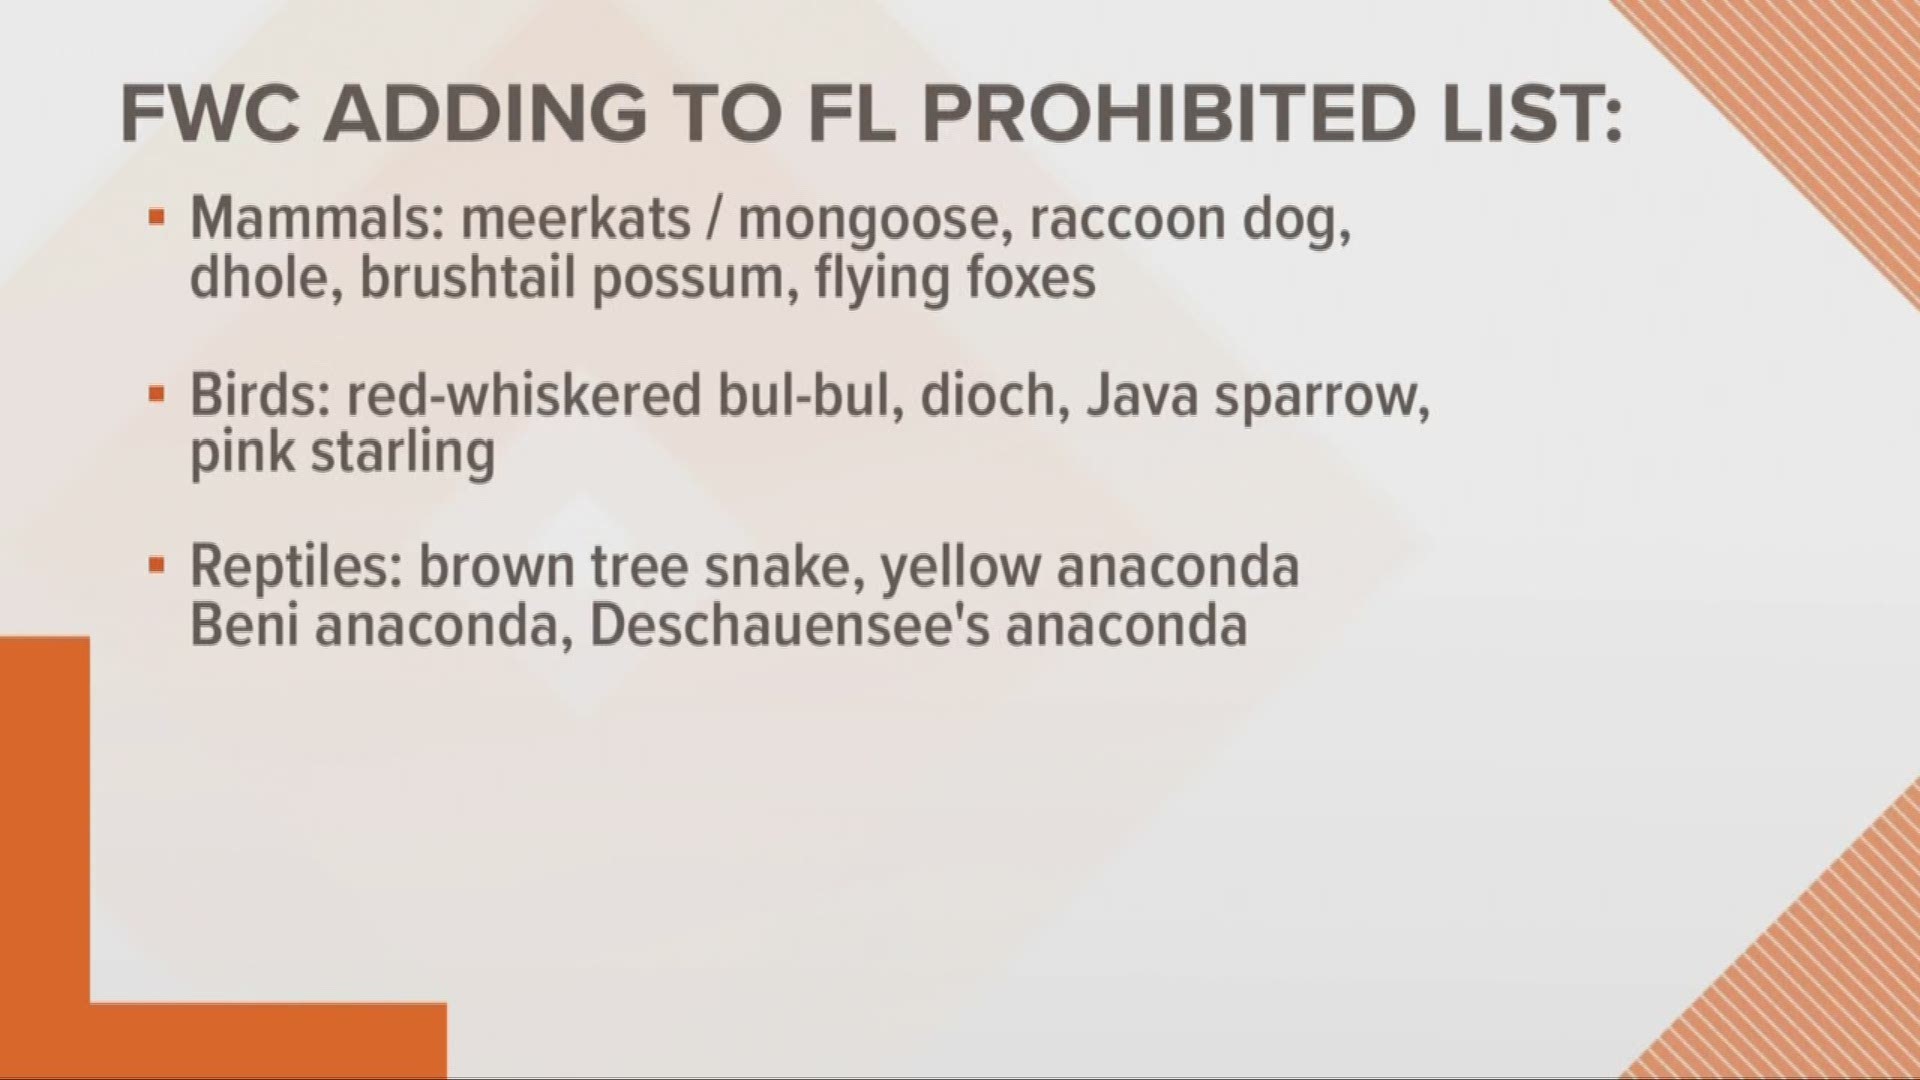 Invasive species are animals not native to Florida that cause economic or environmental harm.